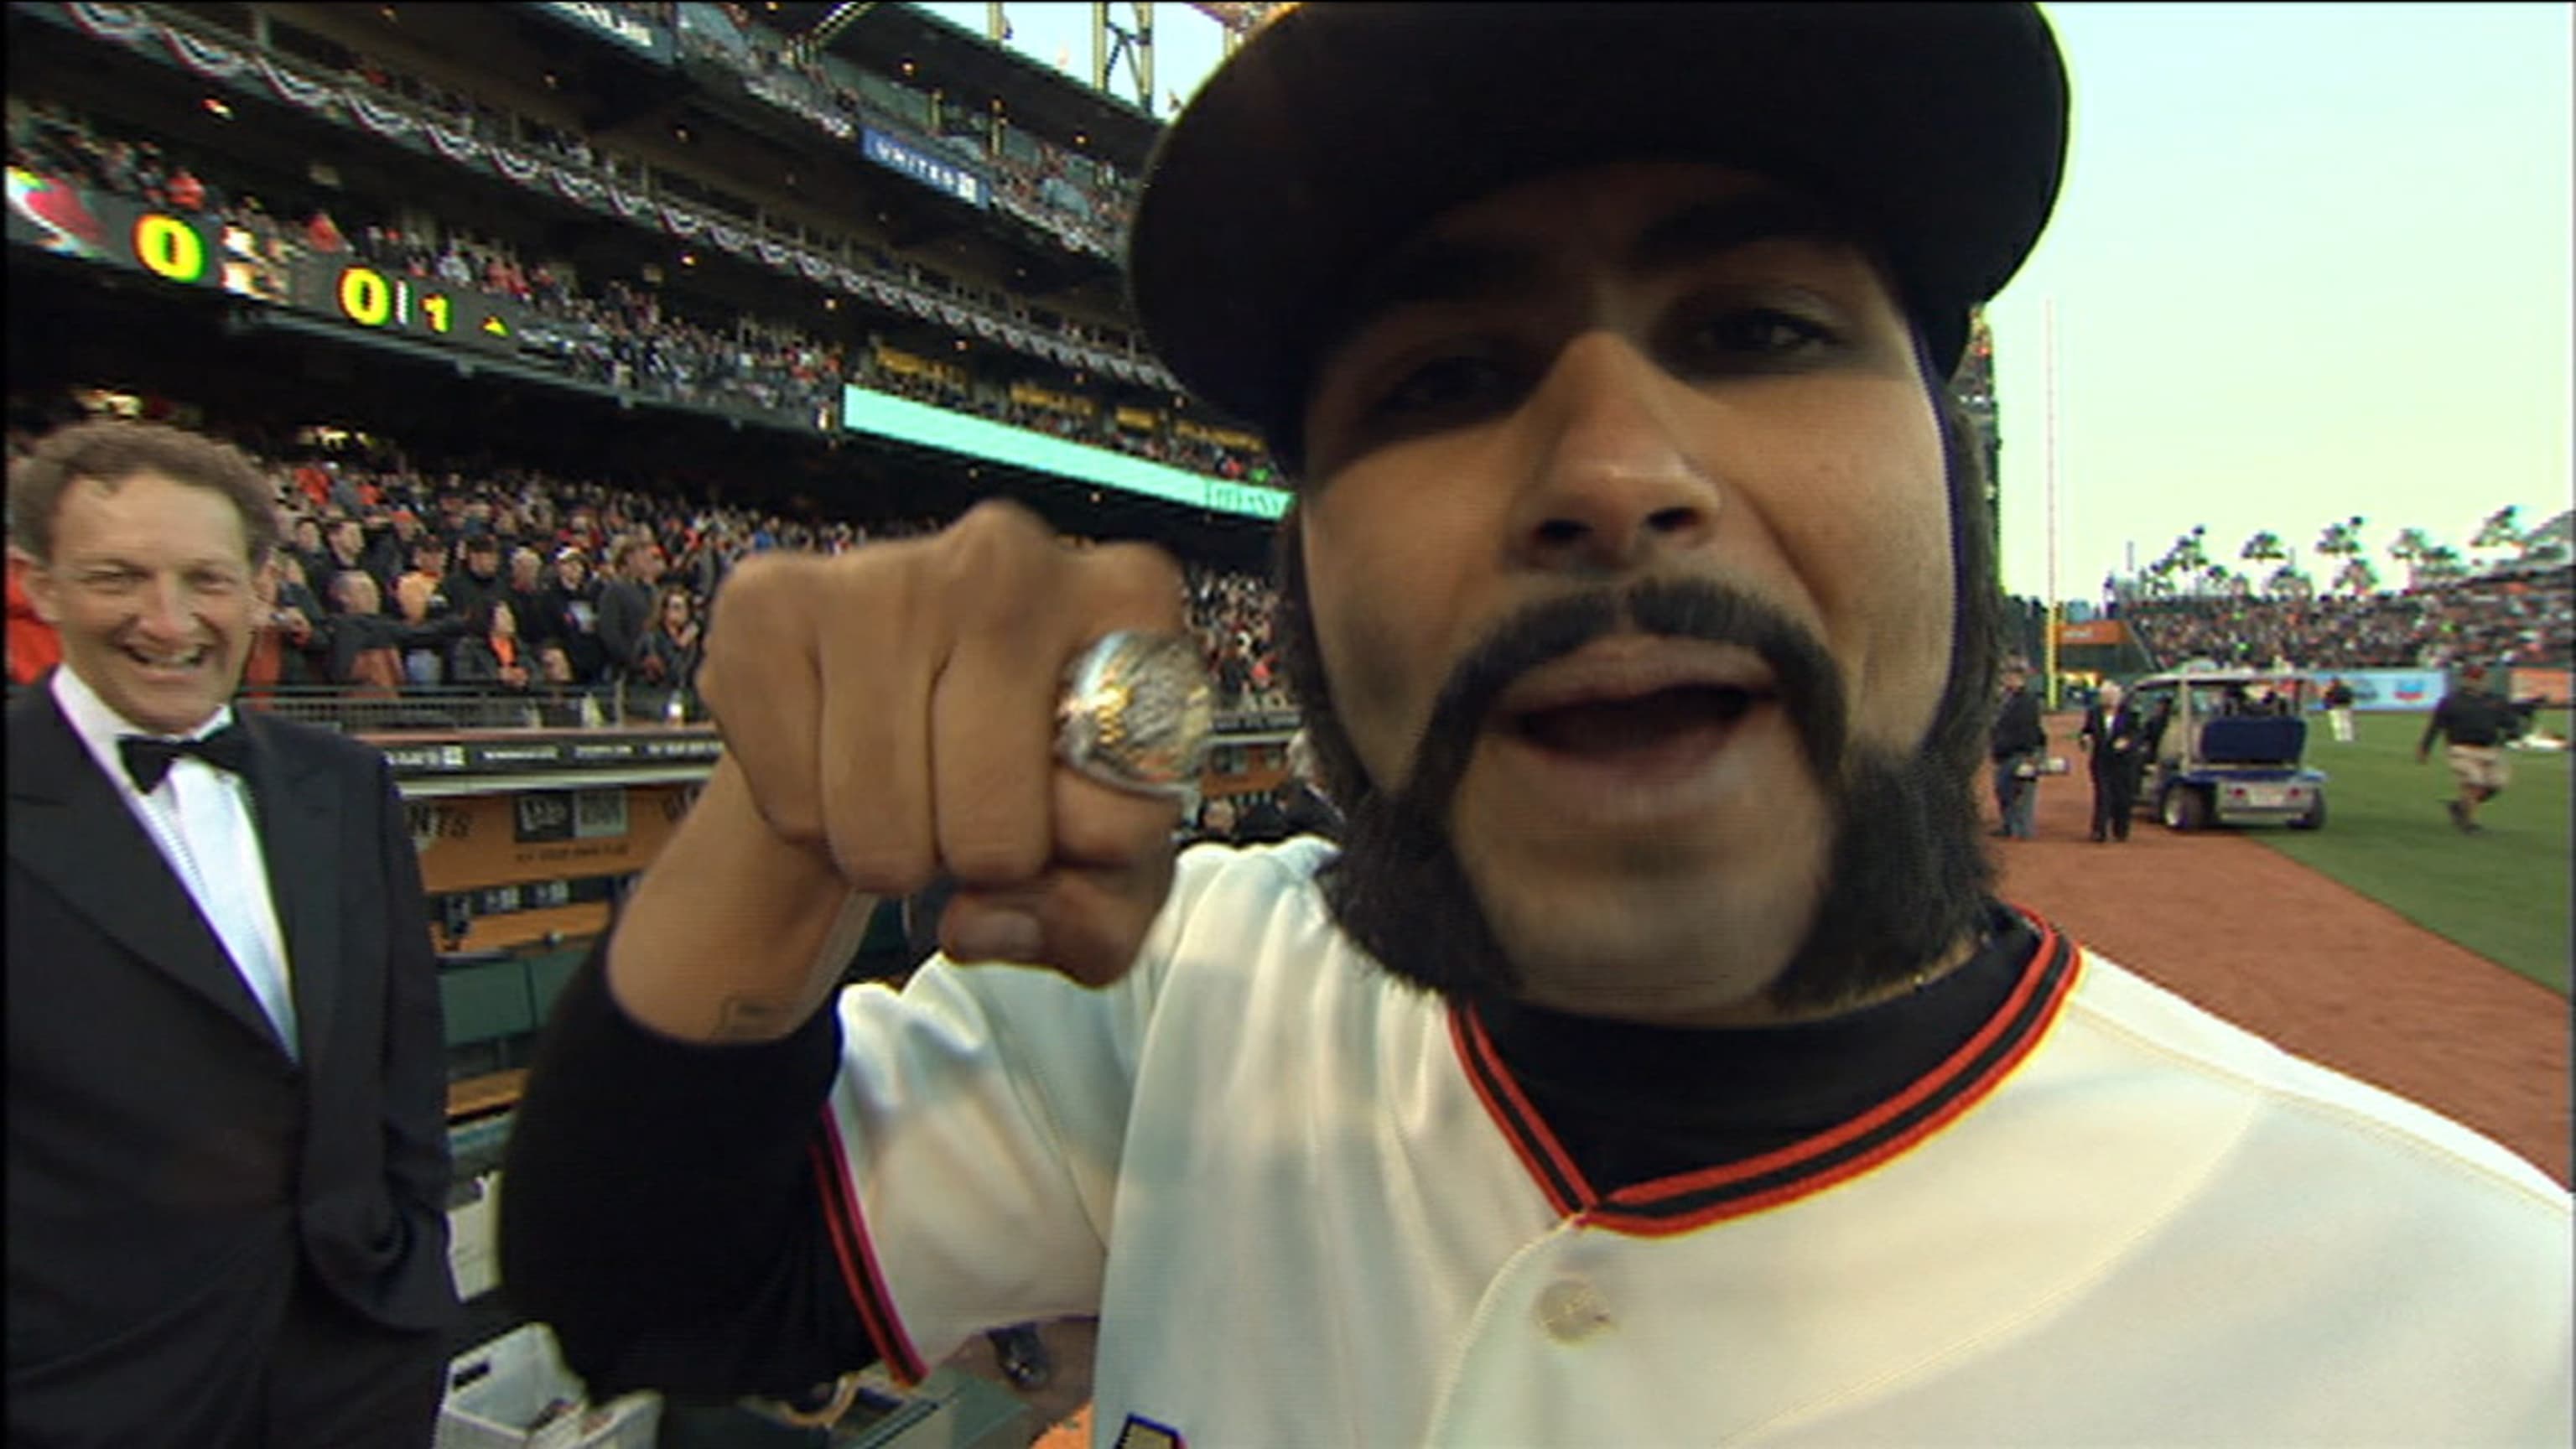 Sergio Romo set to retire as a San Francisco Giant after signing minor  league deal with team